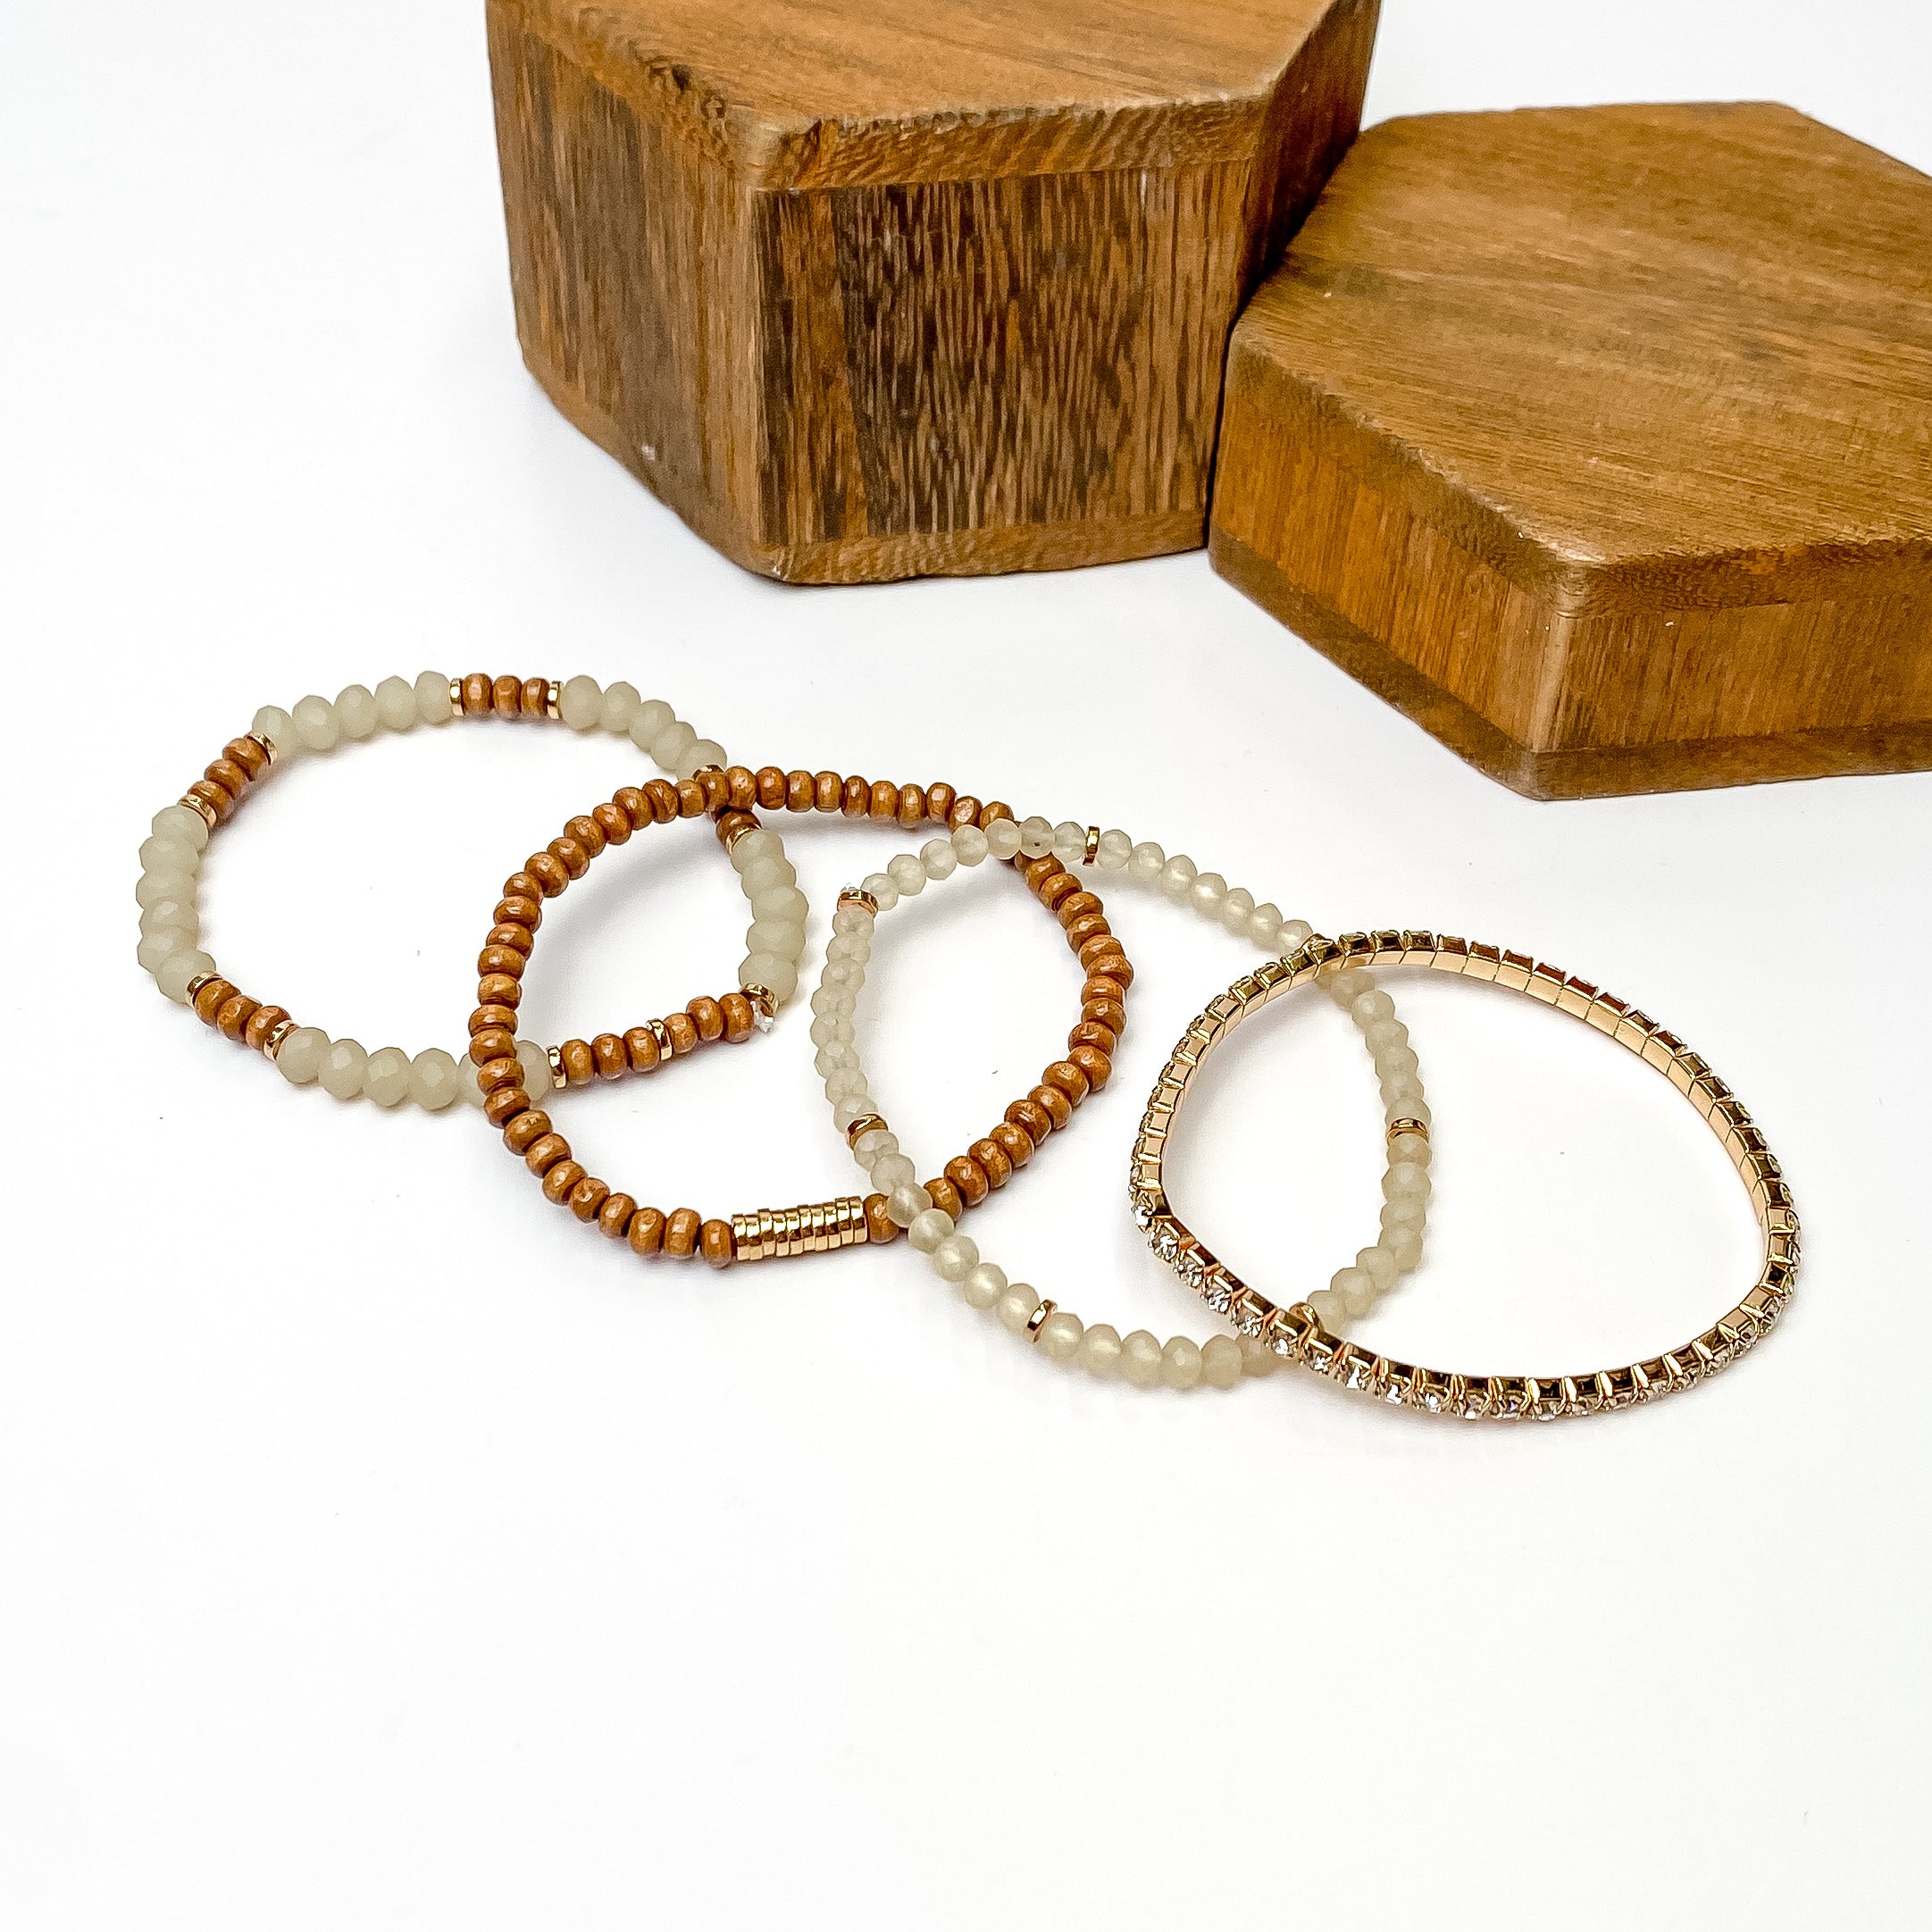 Set of four bracelets pictured laying one on top of the other. The bracelet at the top includes white and brown beads, the second has brown beads and gold disc beads, the third includes ivory beads with gold disk spacers, and the last bracelet is a full crystal band with a gold setting. These bracelets are pictured on a white background with brown blocks in the top right corner. 